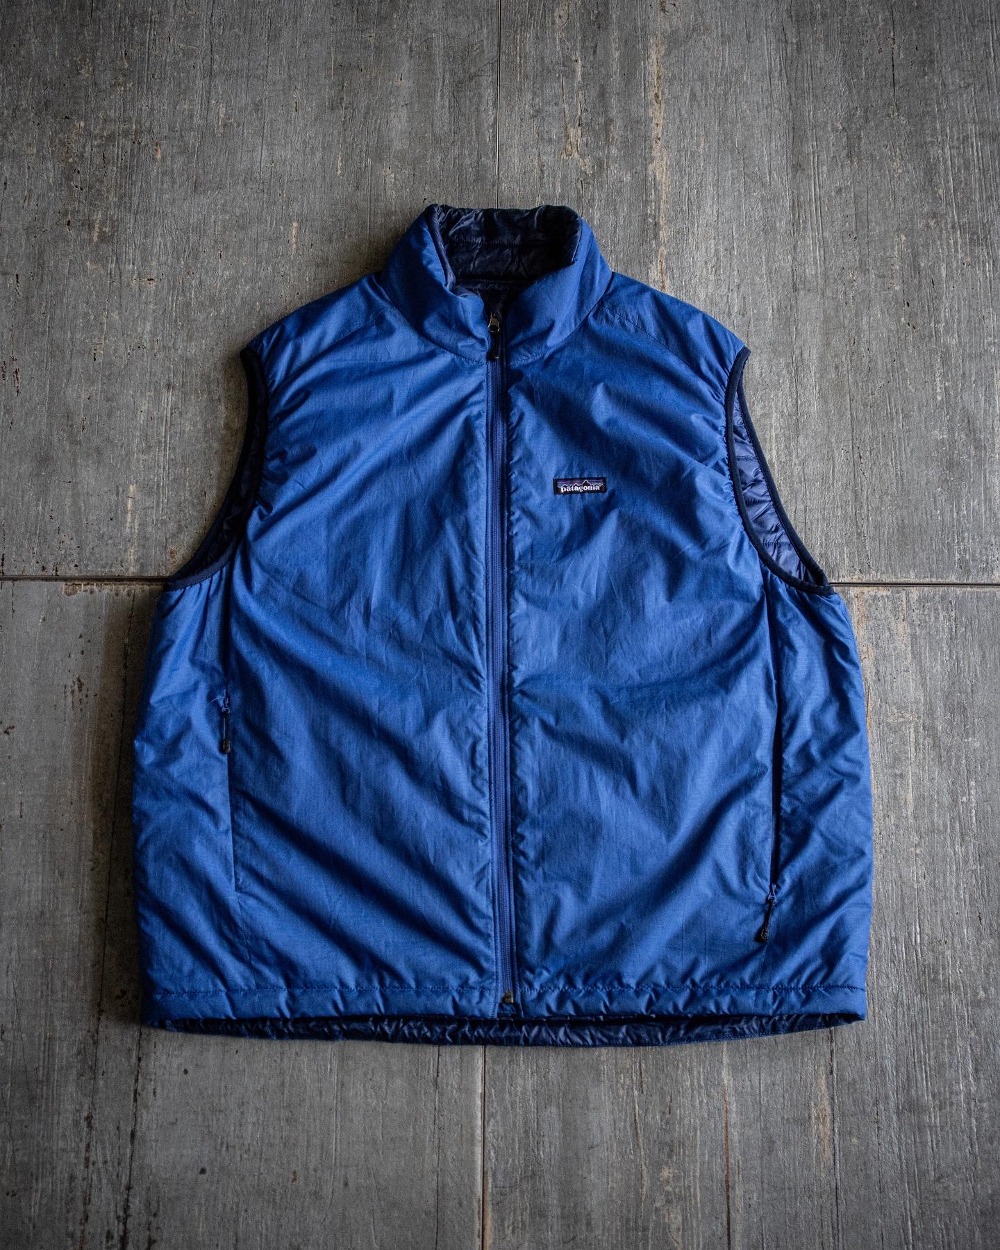 2007 Patagonia Puffball Vest (105-110size)